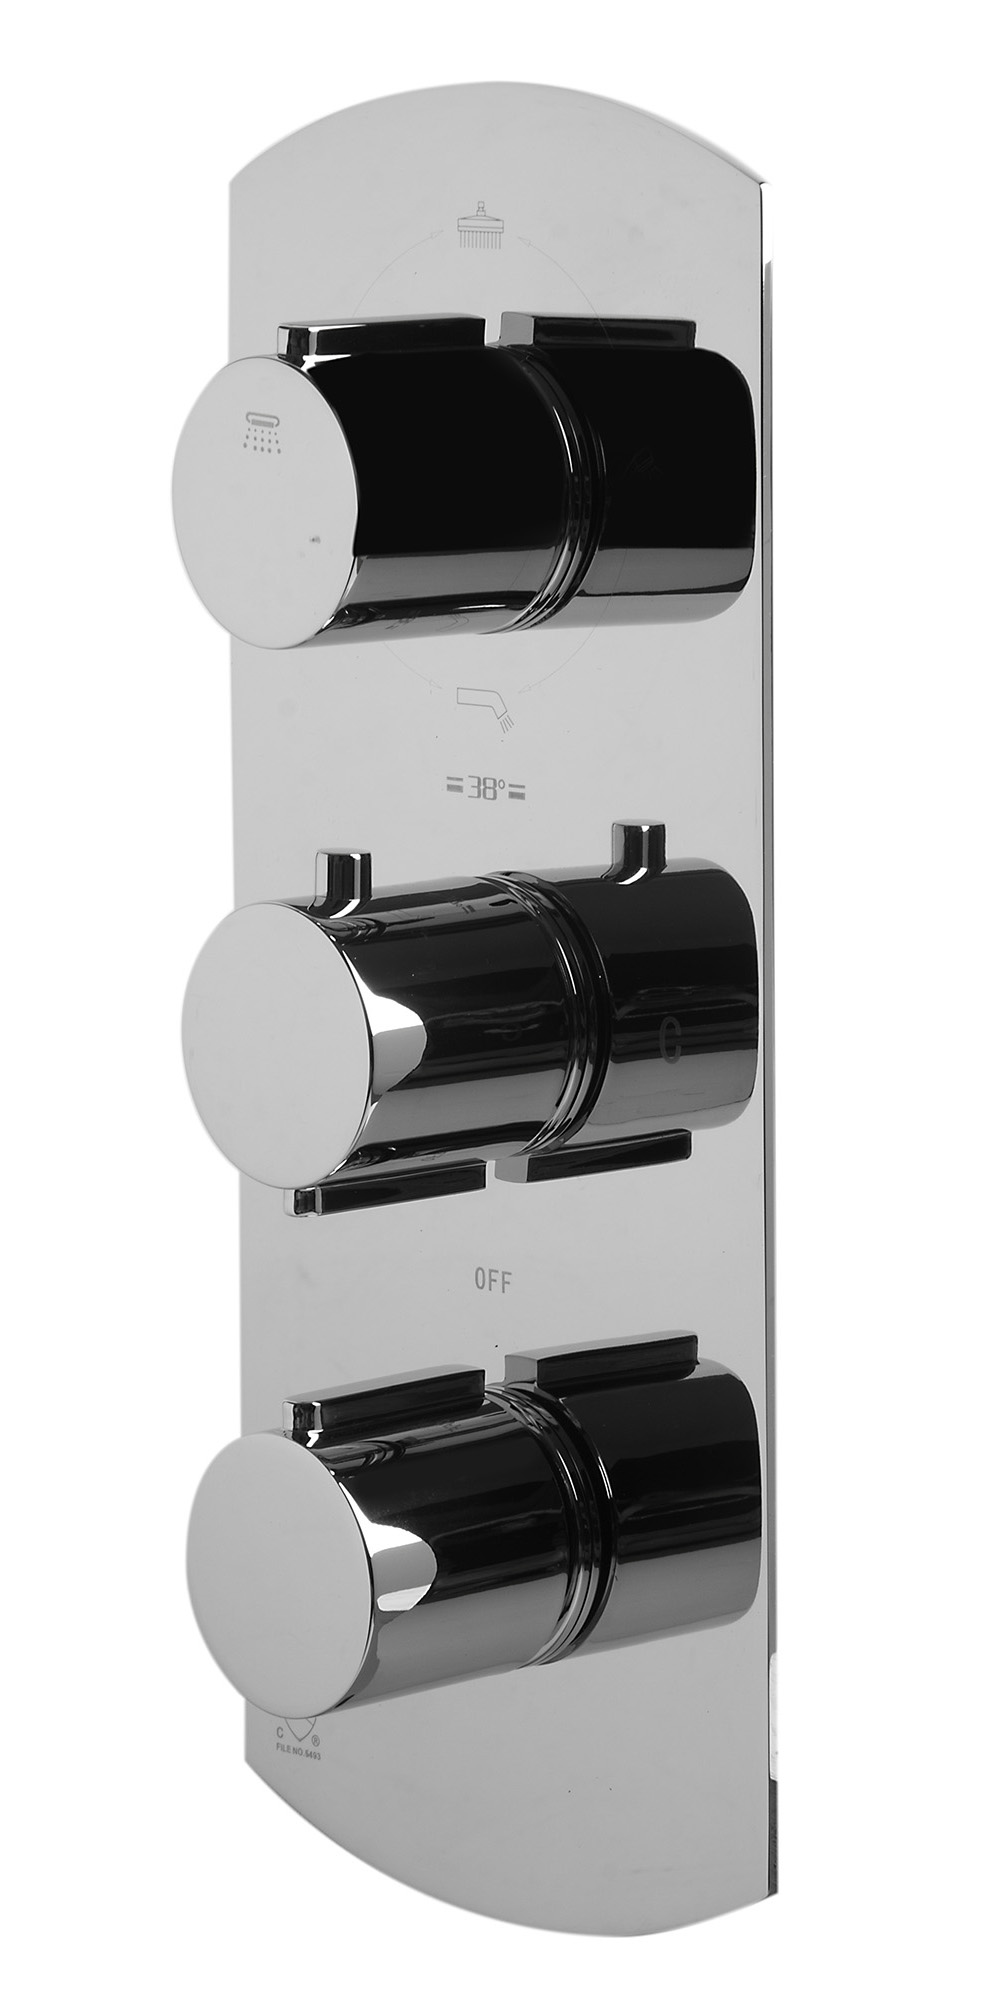 ALFI brand AB4101-PC Polished Chrome Concealed 4-Way Thermostatic Valve Shower Mixer /w Round Knobs